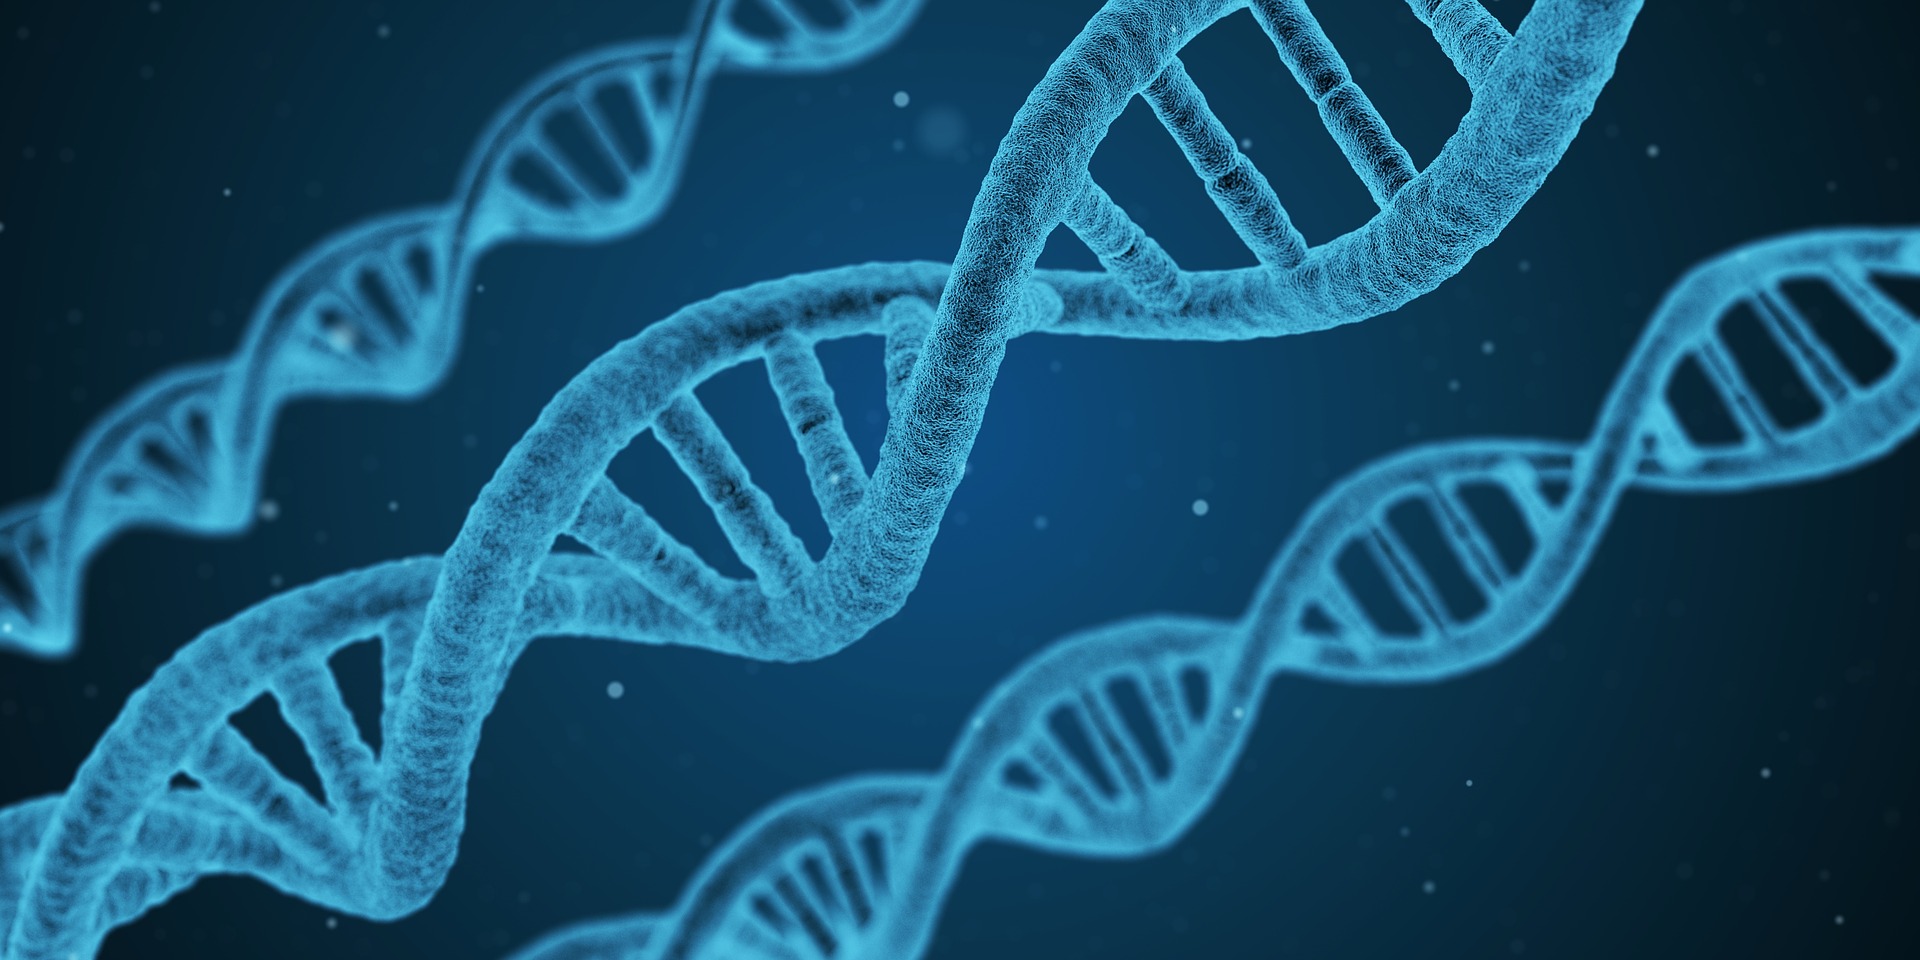 Conflicting Study Results: Do DNA Breaks Hold Answers?